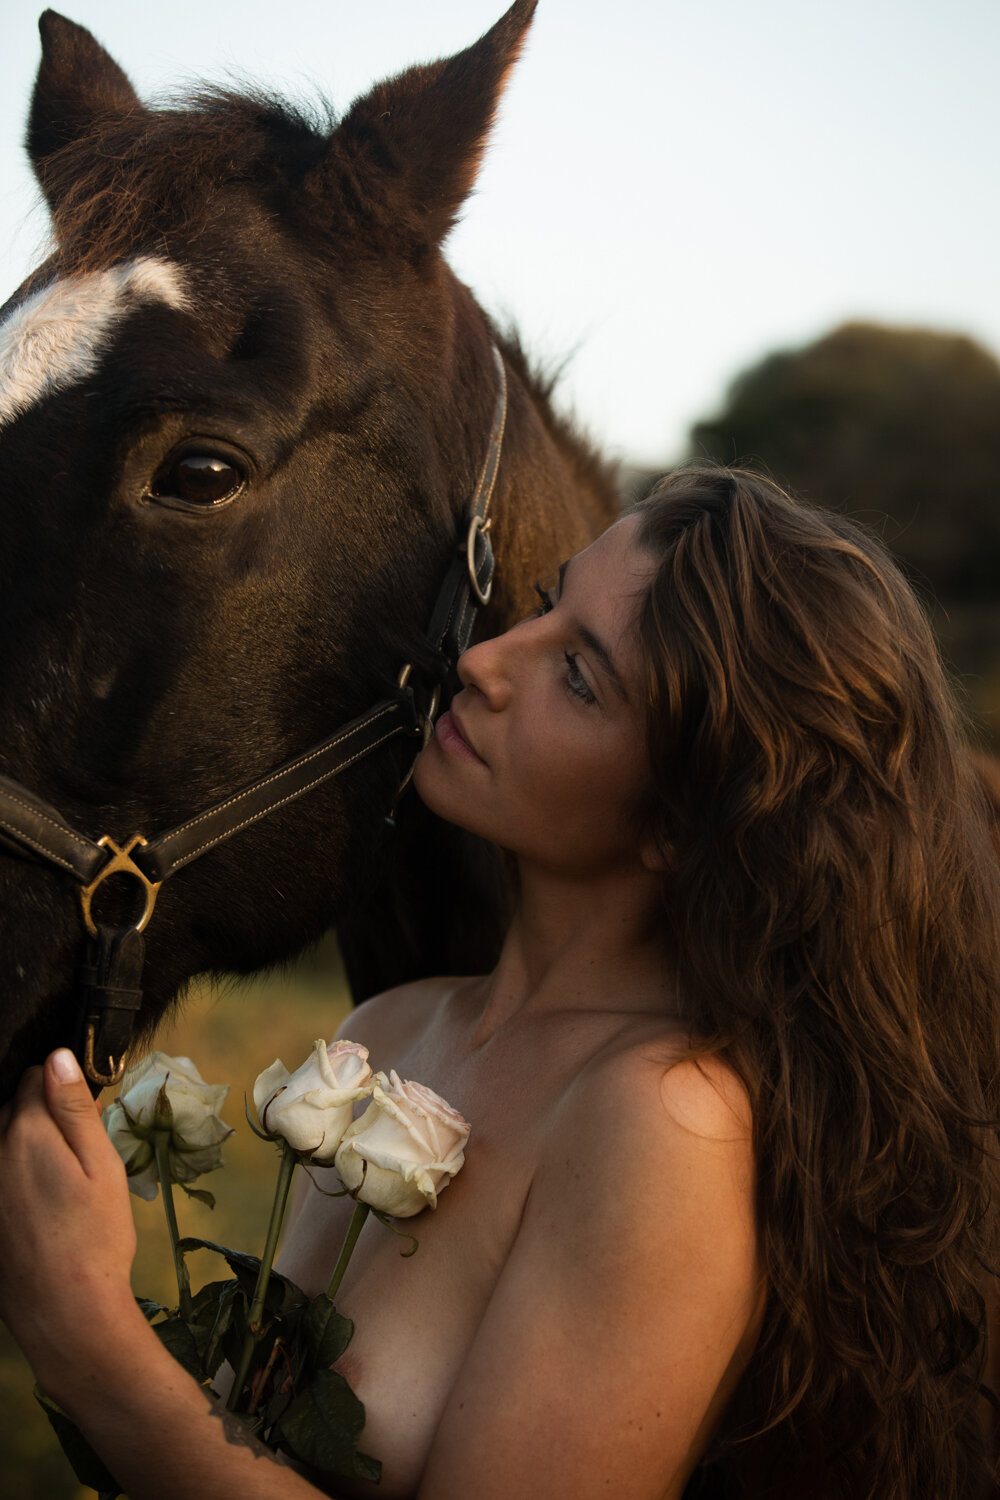 Immortale corsica corse beauty products beautiful horse model produits beaute beach travel Krista Espino sea island mediterranean photographe photographer fashion lifestyle editorial nature natural france french skin skincare face mask rose country-38.jpg